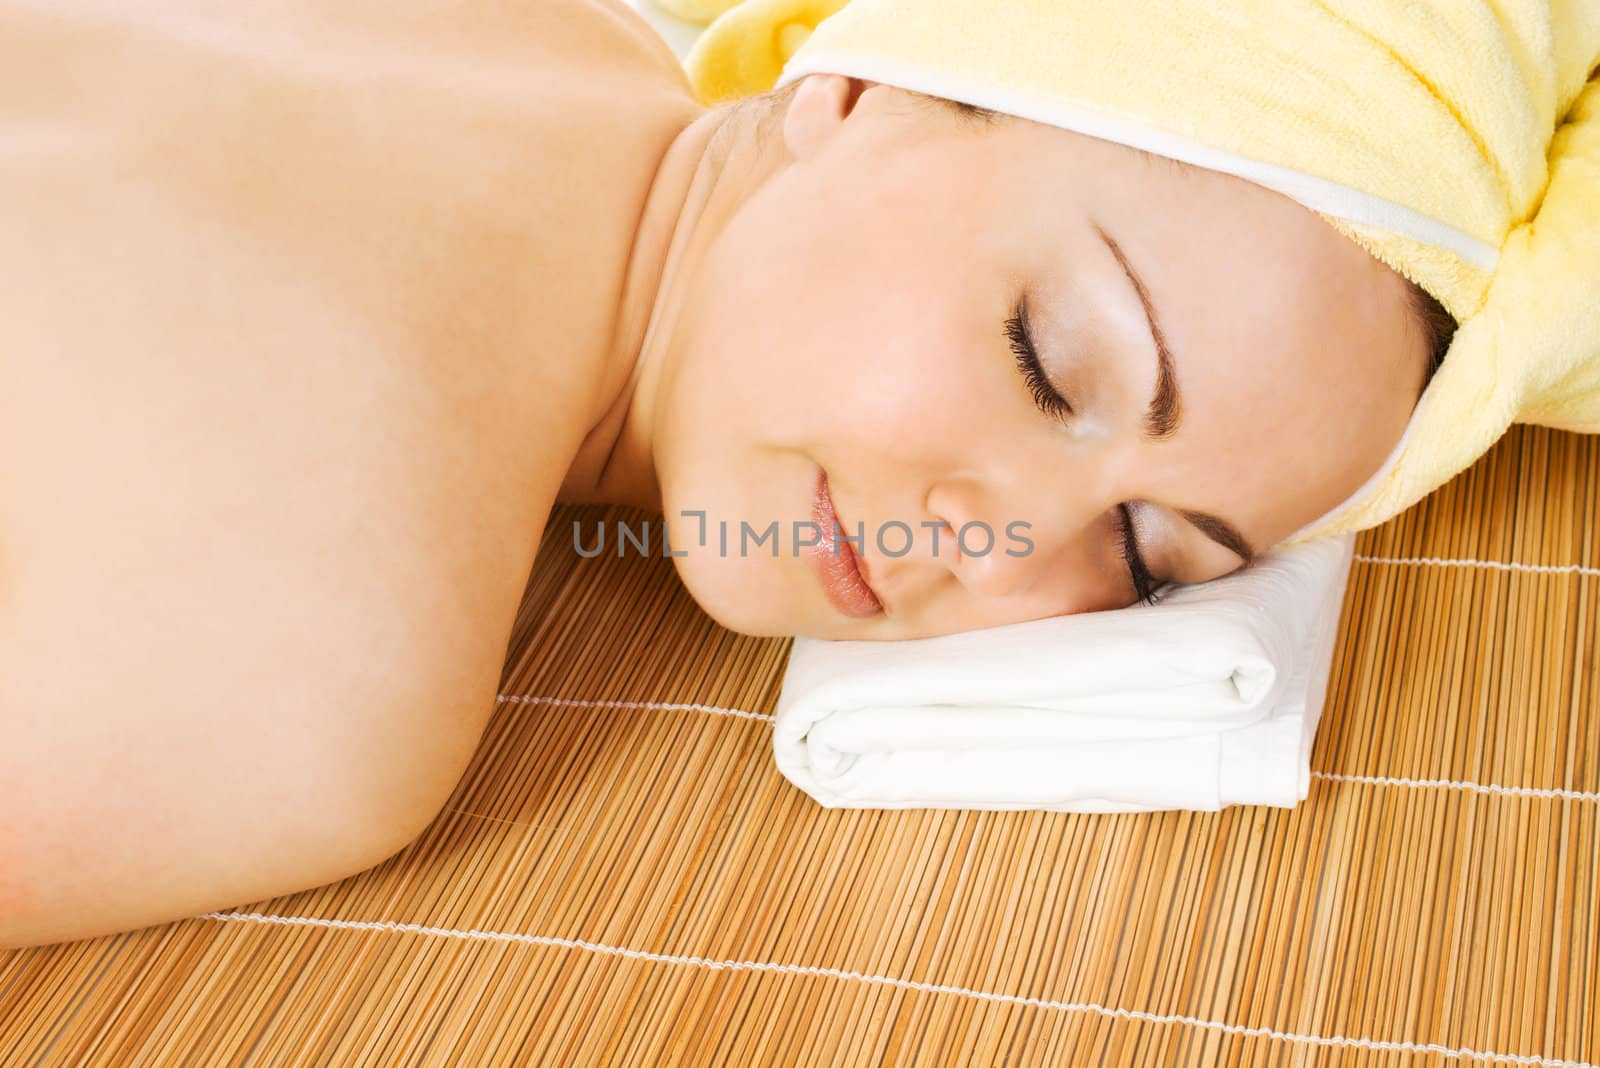 Young woman getting the spa treatment by rbv